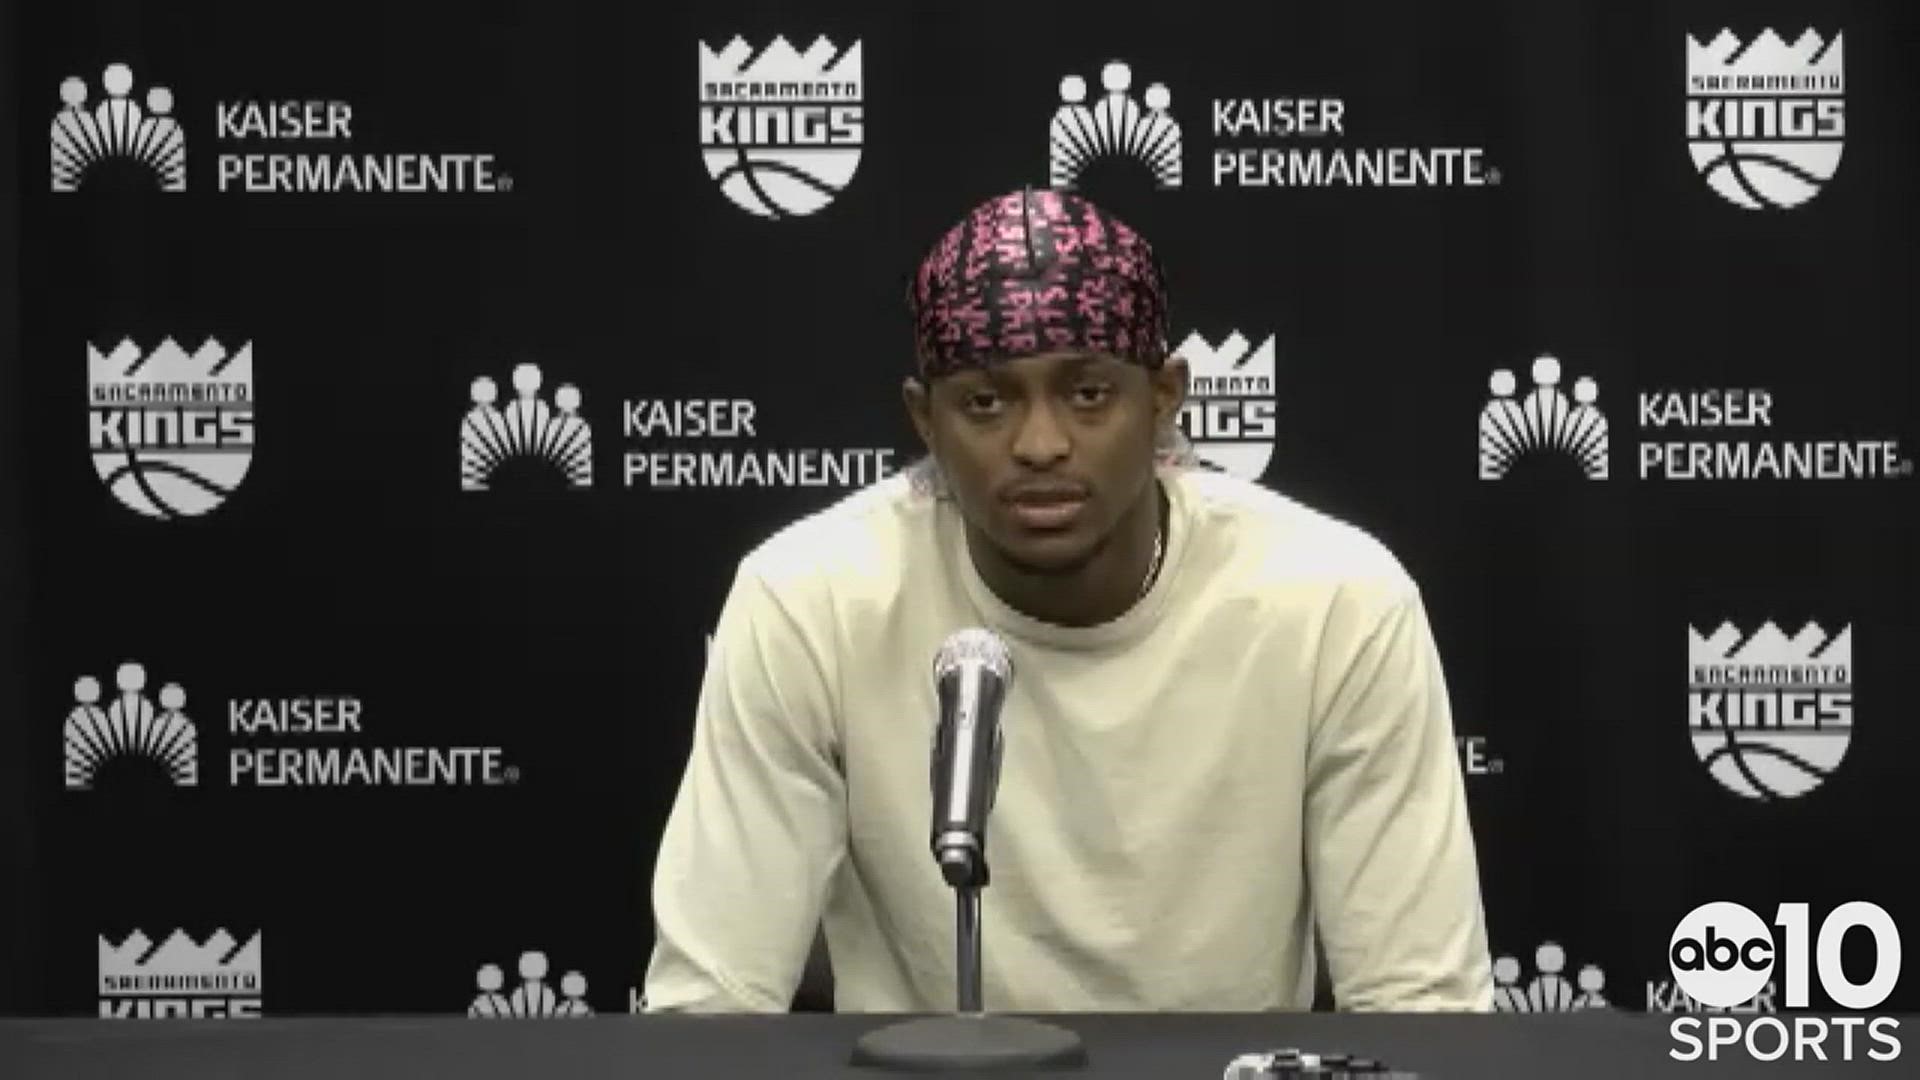 De'Aaron Fox blames a poor start to the game in Wednesday's 136-117 loss to the Spurs in San Antonio and analyzes the struggles on the defensive end.